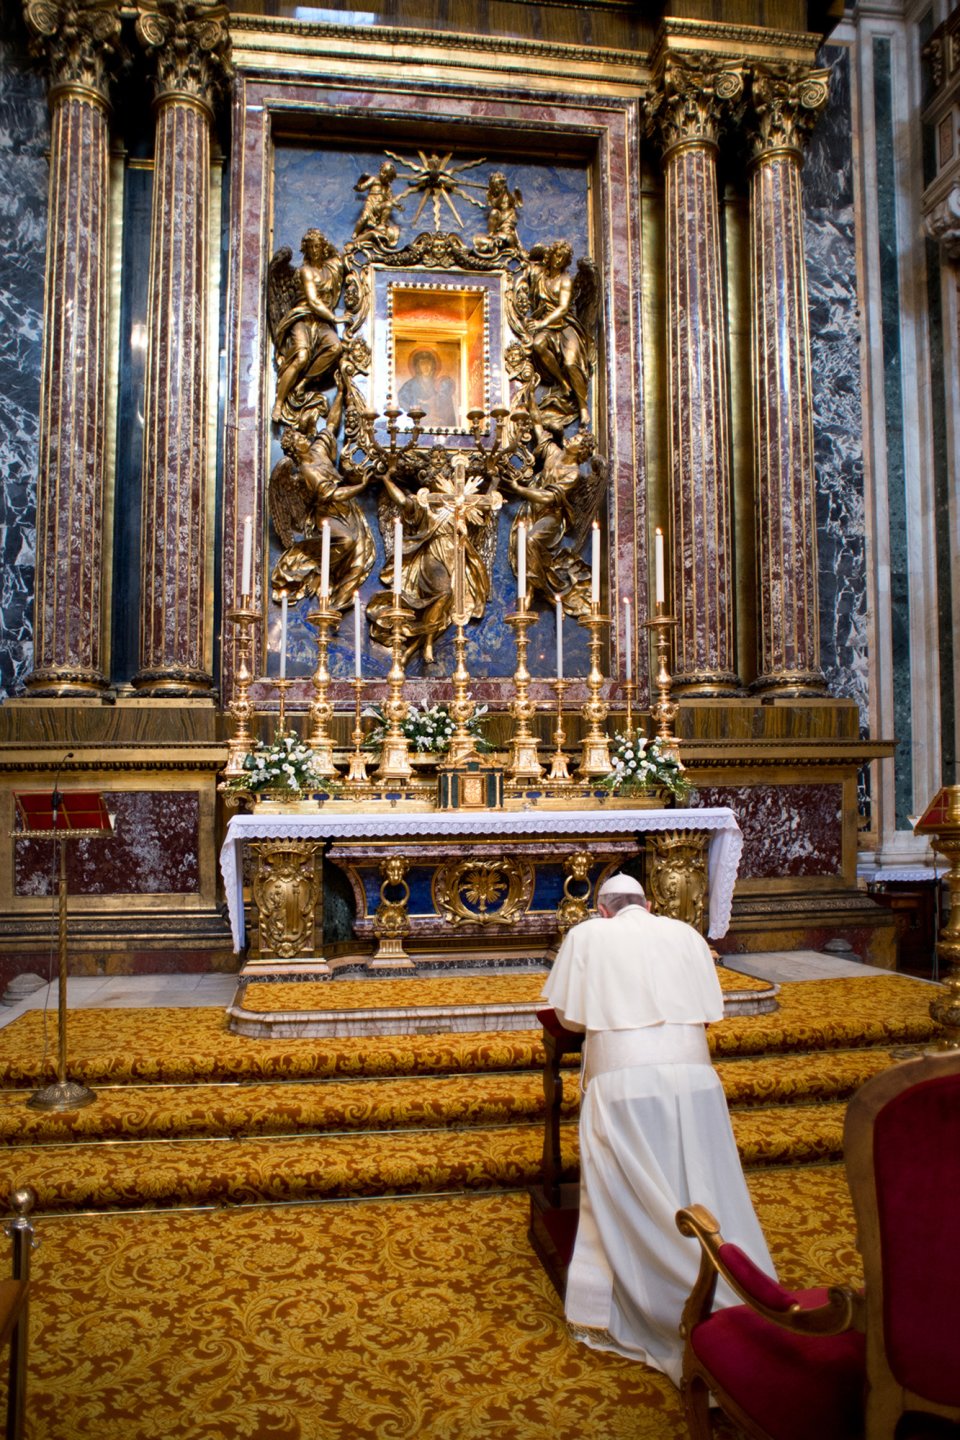 In this photo provided by the Vatican newspaper L'Osservatore Romano, Pope Francis prays in Rome's St. Mary Major Basilica he unexpectedly visited in view of his upcoming trip to Brazil to celebrate the World Youth Day, Saturday, July 20, 2013. Francis leaves Monday, July 22 for Rio de Janeiro, where more than a million young Catholics are expected to celebrate their new pope. The 76-year-old Argentine became the church's first pontiff from the Americas in March, and the trip to Brazil is his first international journey since becoming pontiff. Catholic youth festivals are meant to reinvigorate the faithful, and Francis is expected to inspire young people with his humble ways. (AP Photo/L'Osservatore Romano, ho)